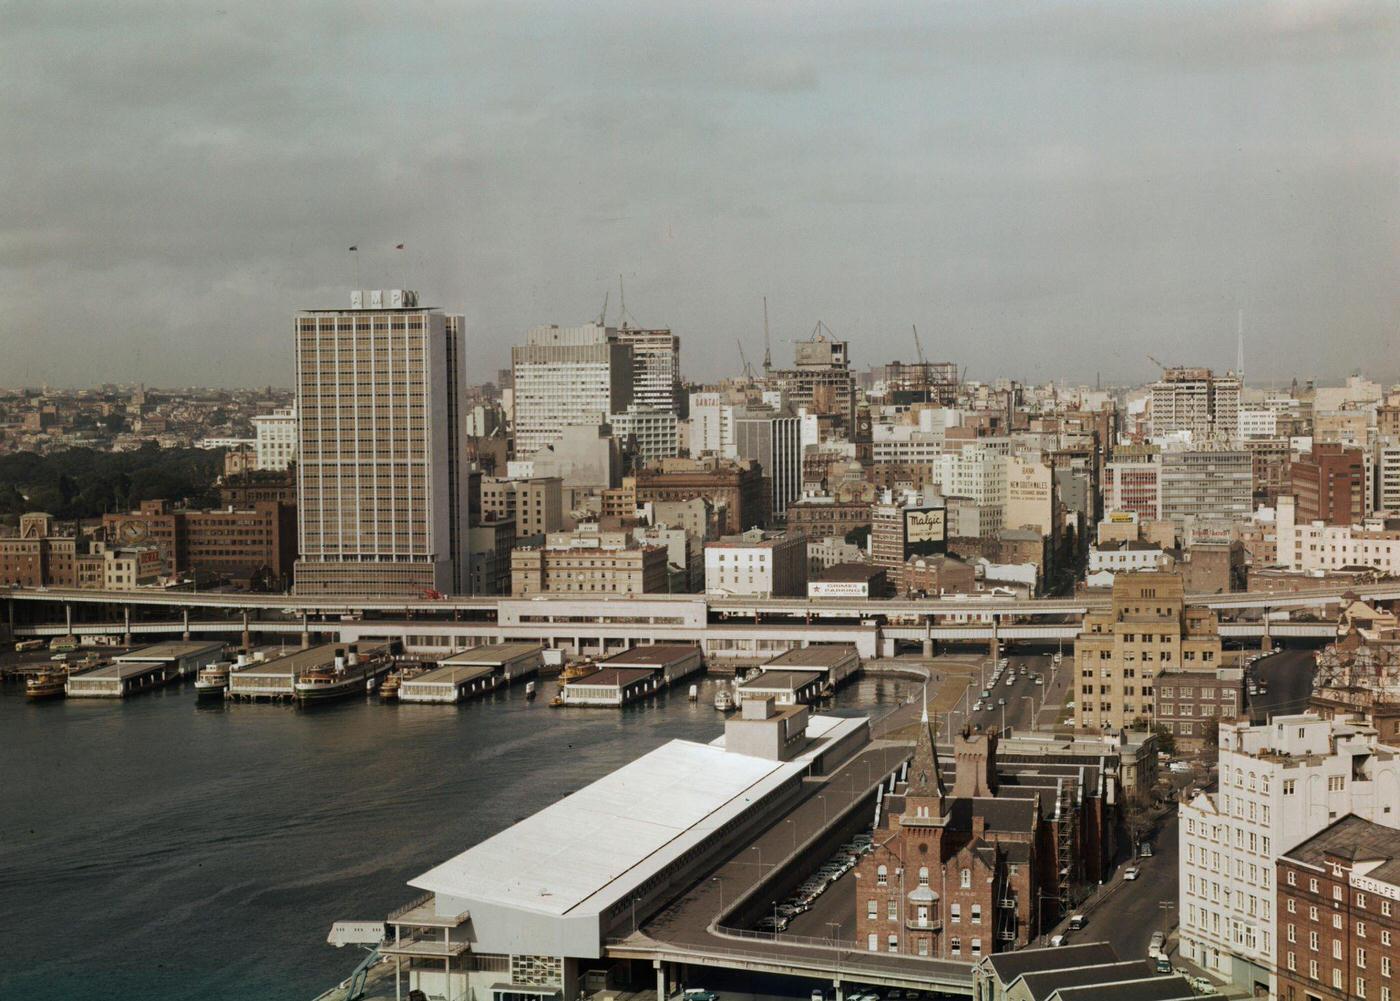 Sydney Harbour Bridge of the Circular Quay wharves and Overseas Passenger Terminal overlooked by the recently completed AMP Building office block in downtown Sydney, 1963